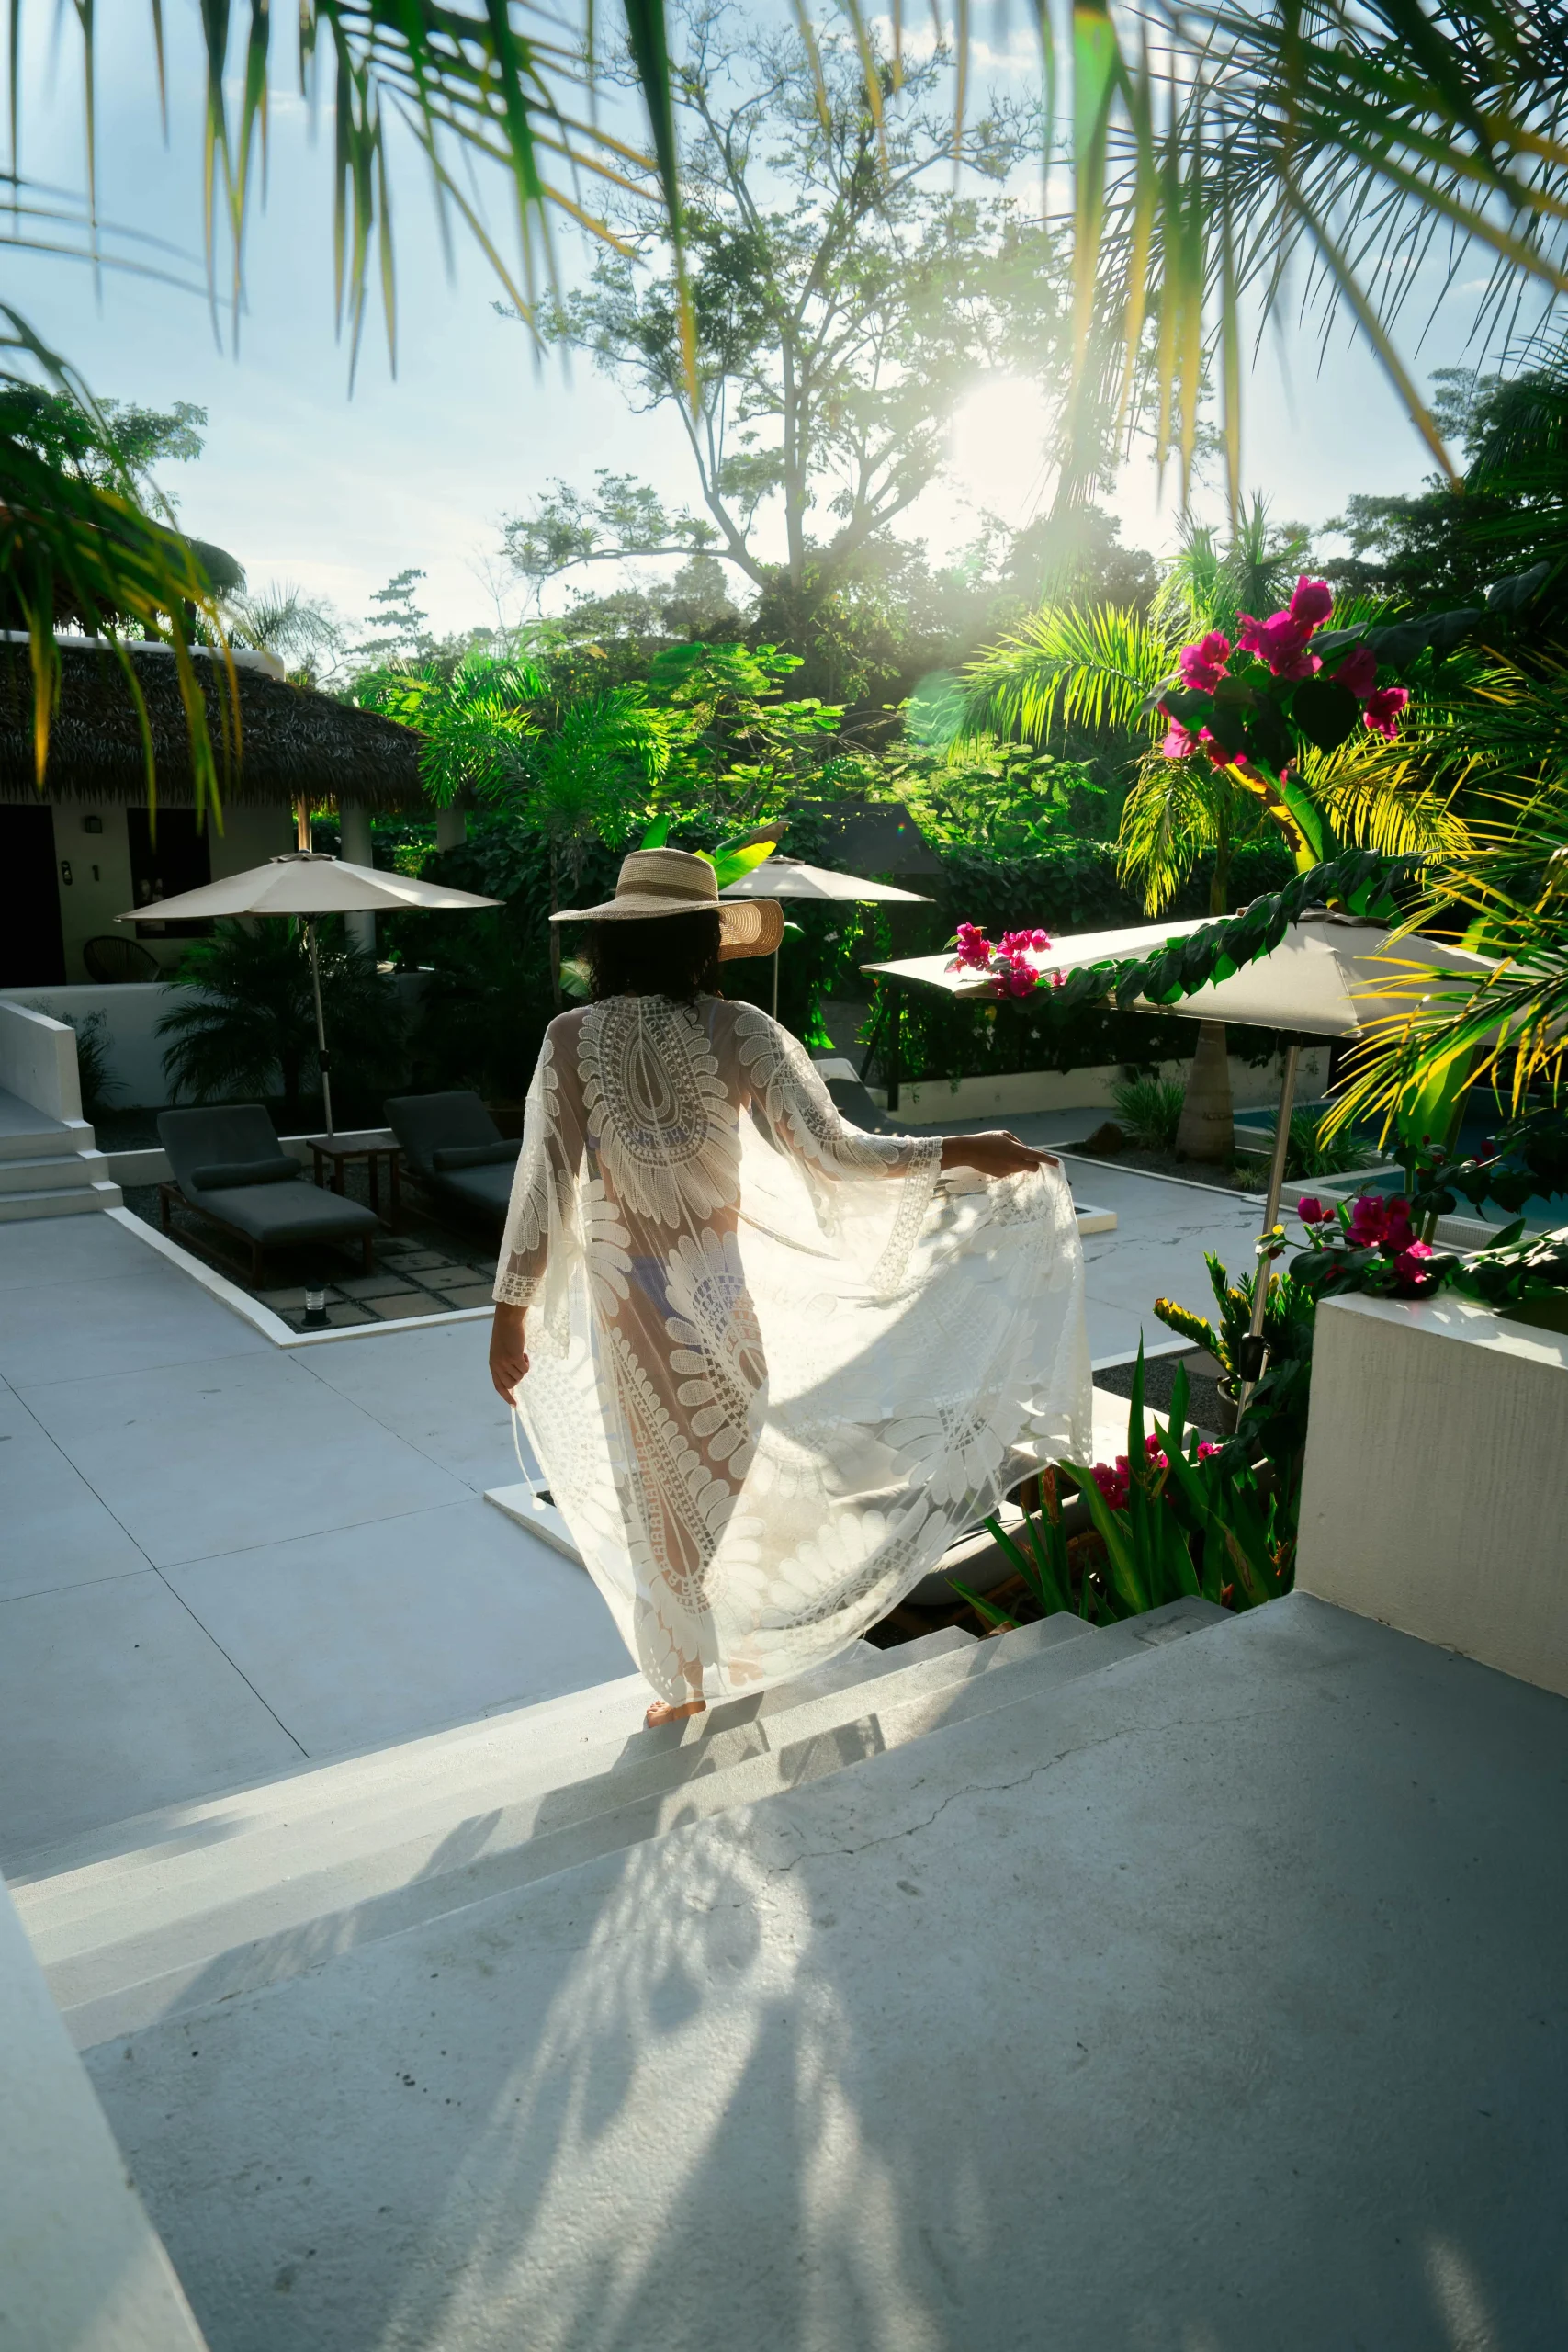 A woman in a flowing white cover-up and sun hat walks down the steps at Vayu Retreat Villas on a sunny day, surrounded by vibrant greenery and tropical flowers. This idyllic scene captures the essence of one of the best hotels in Uvita, Costa Rica, offering a perfect blend of luxury and natural beauty in a jungle retreat setting.